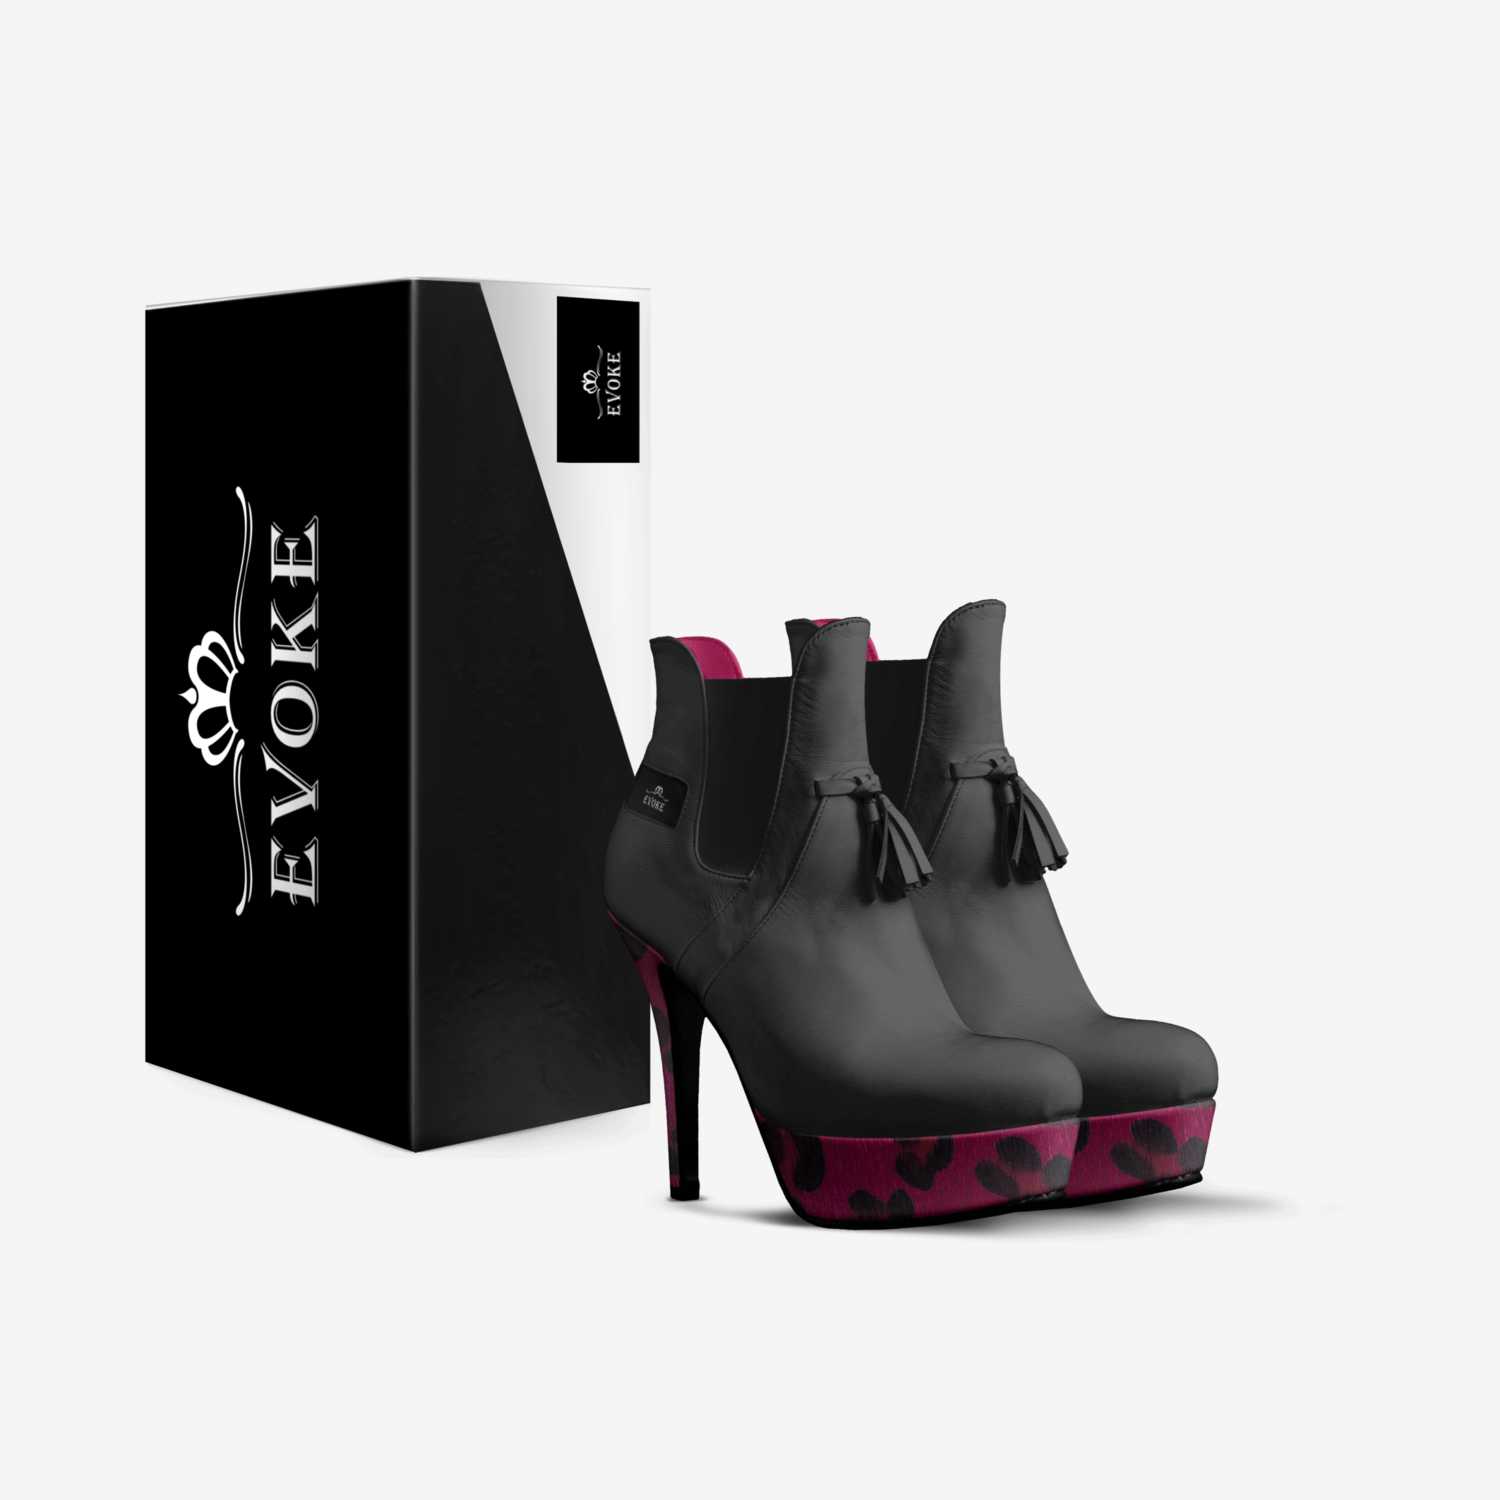 Evoke  custom made in Italy shoes by Juanita Kelly | Box view